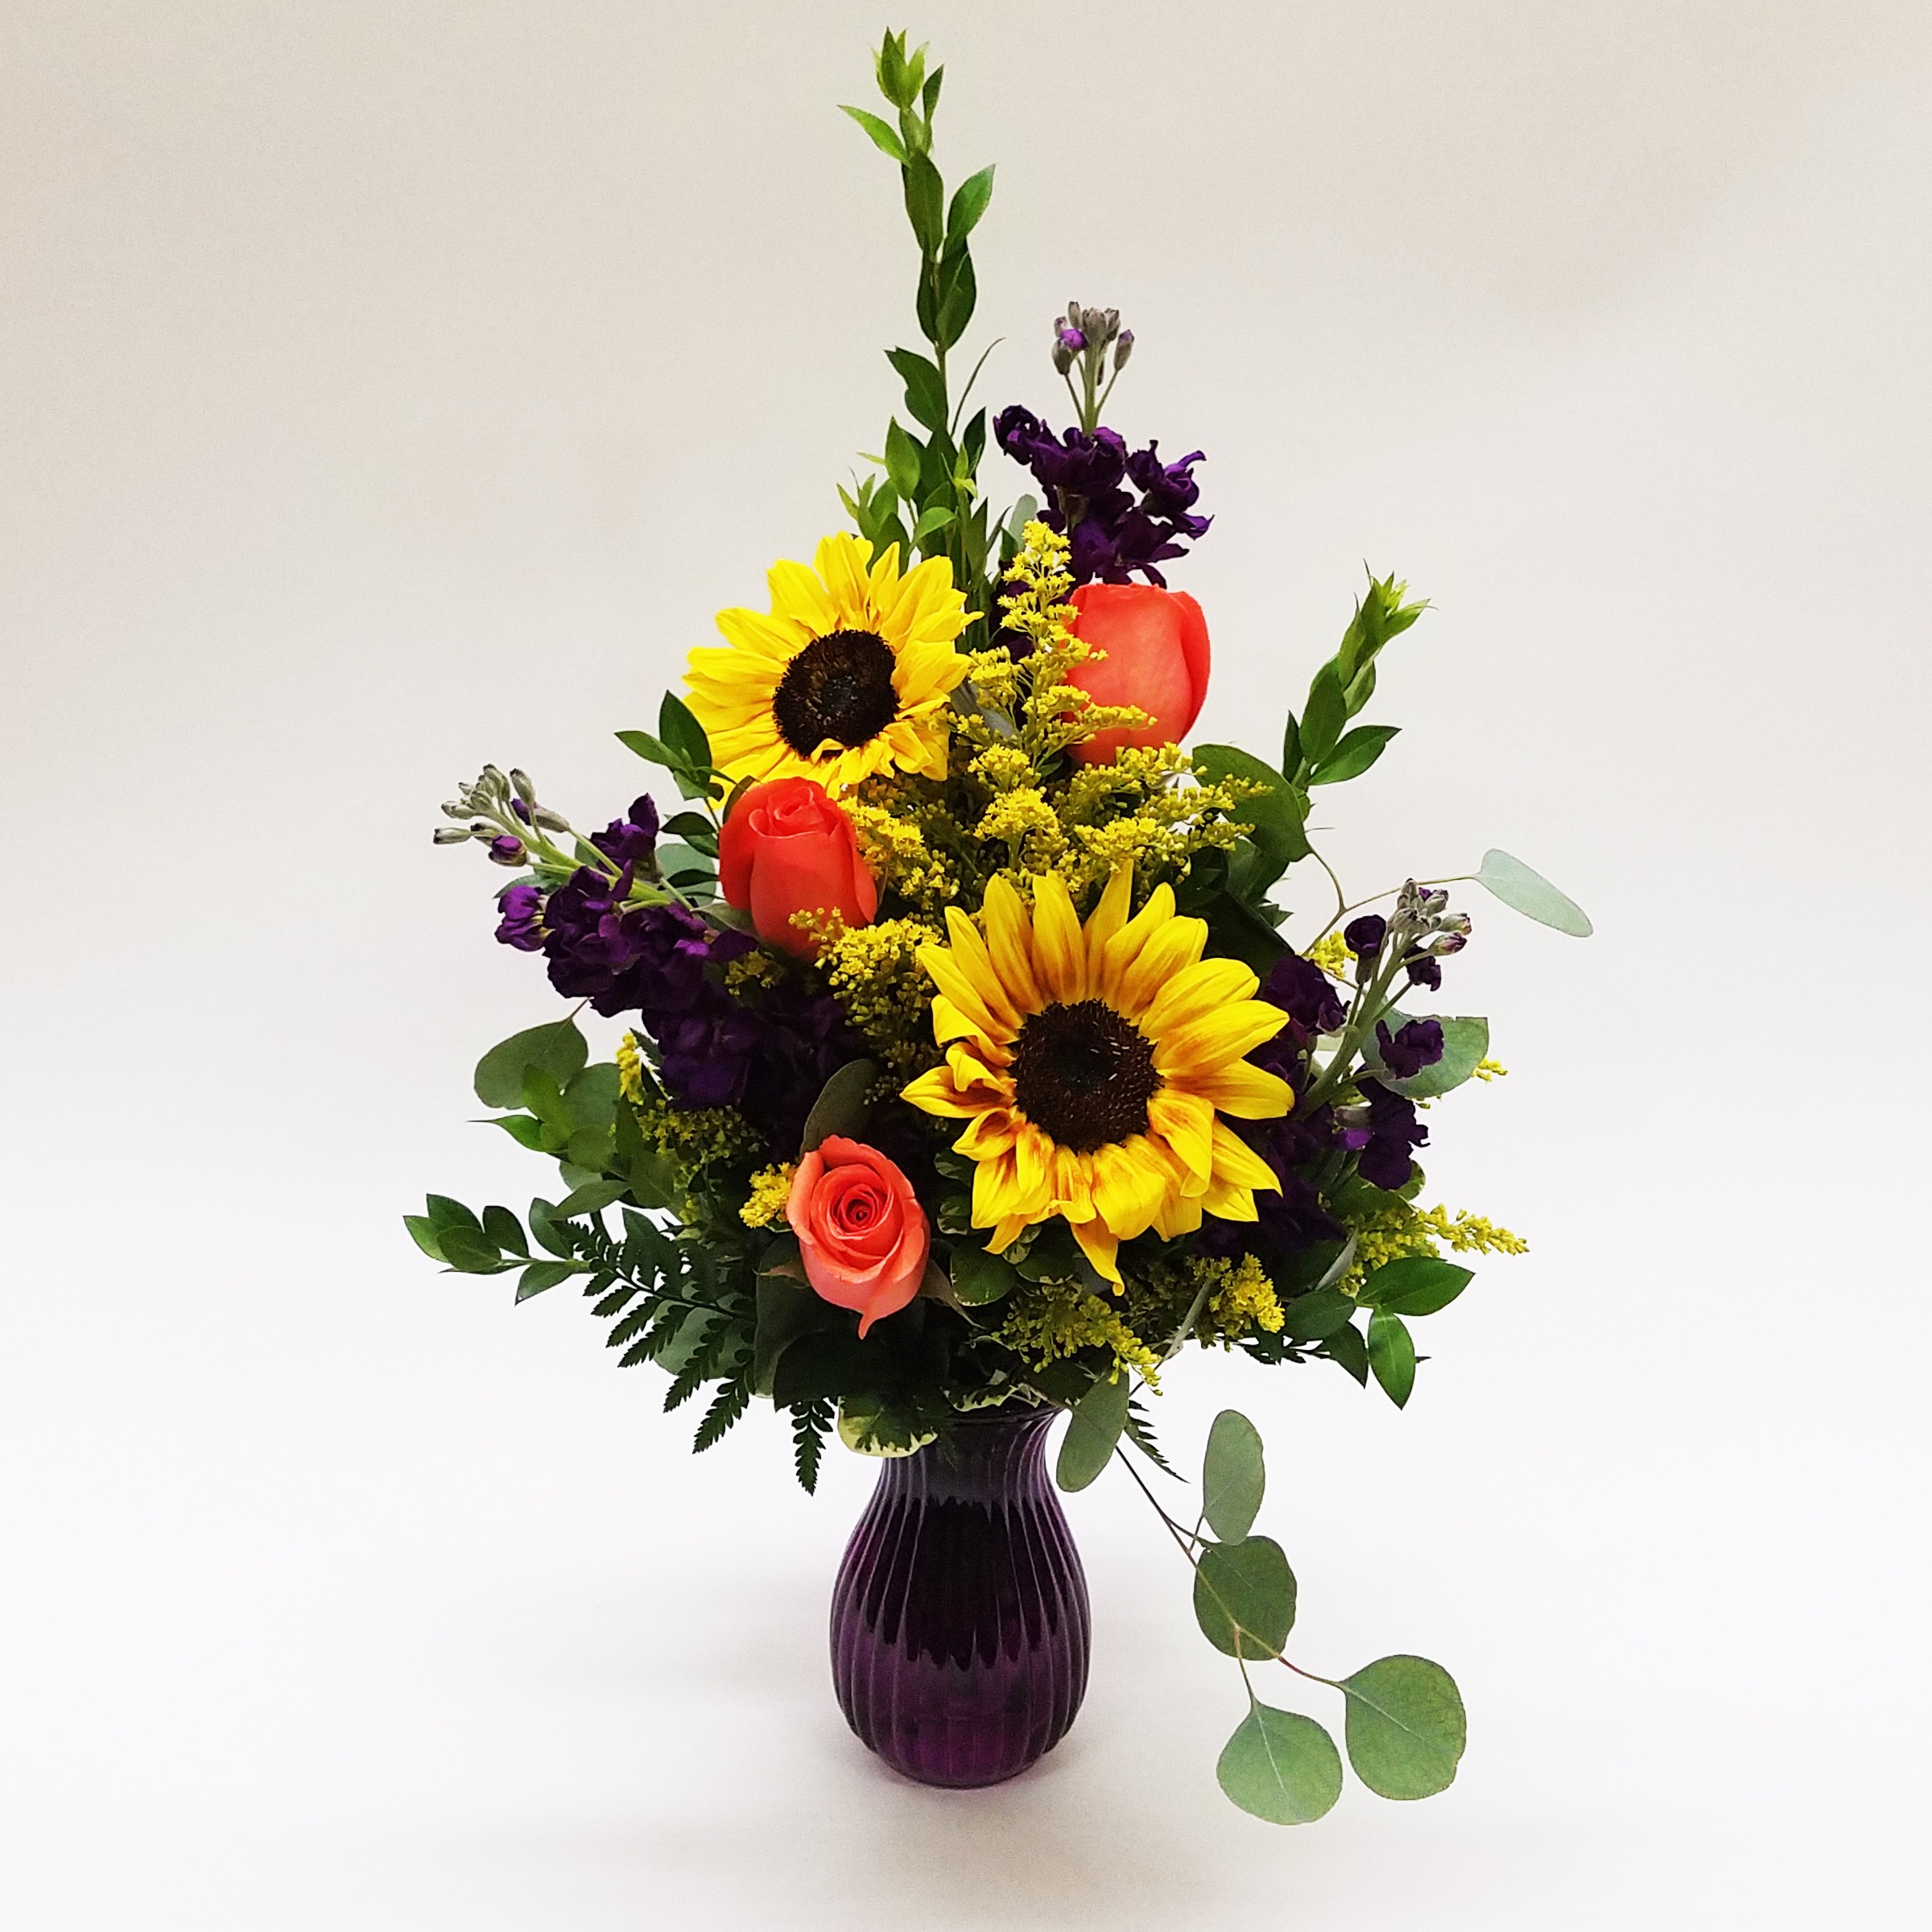 Rays of Sunflowers Vase in Albuquerque, NM | Flowers by Zach-Low